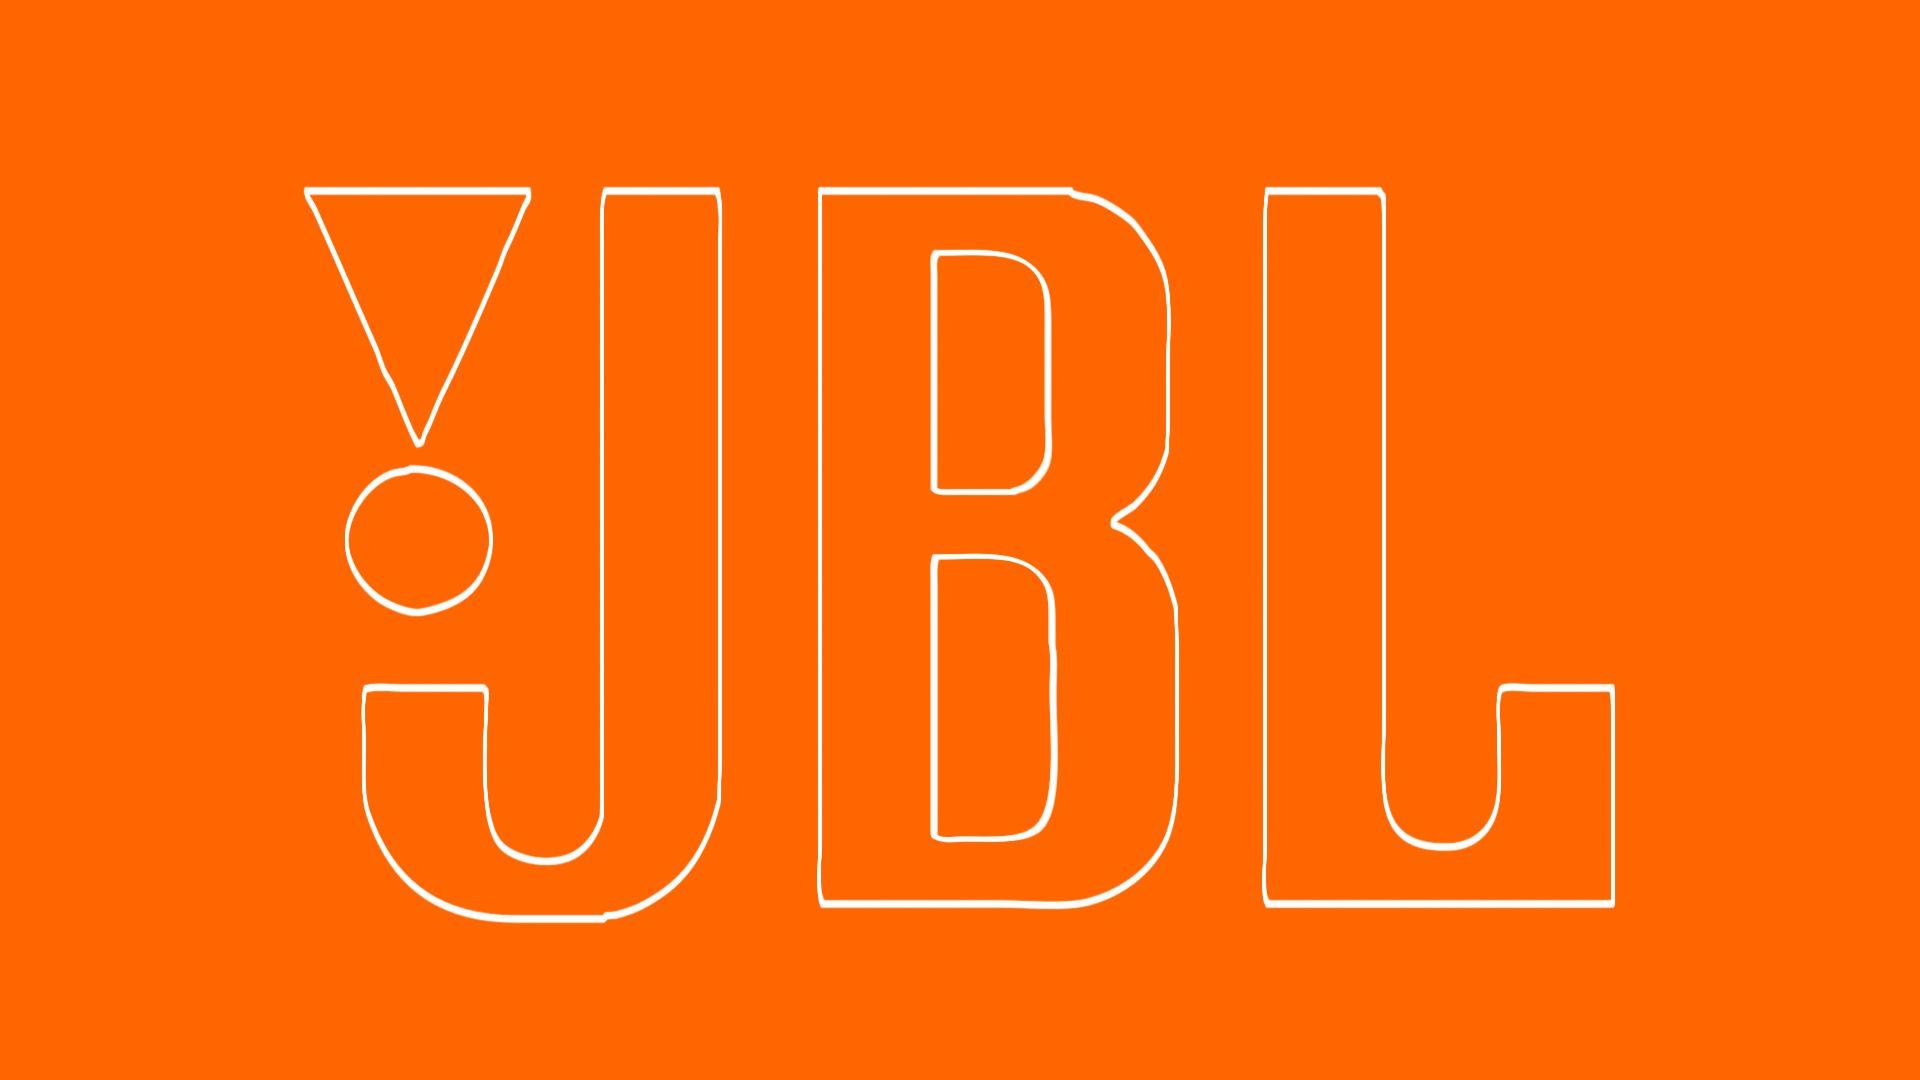 JBL HD Wallpaper and Background Image